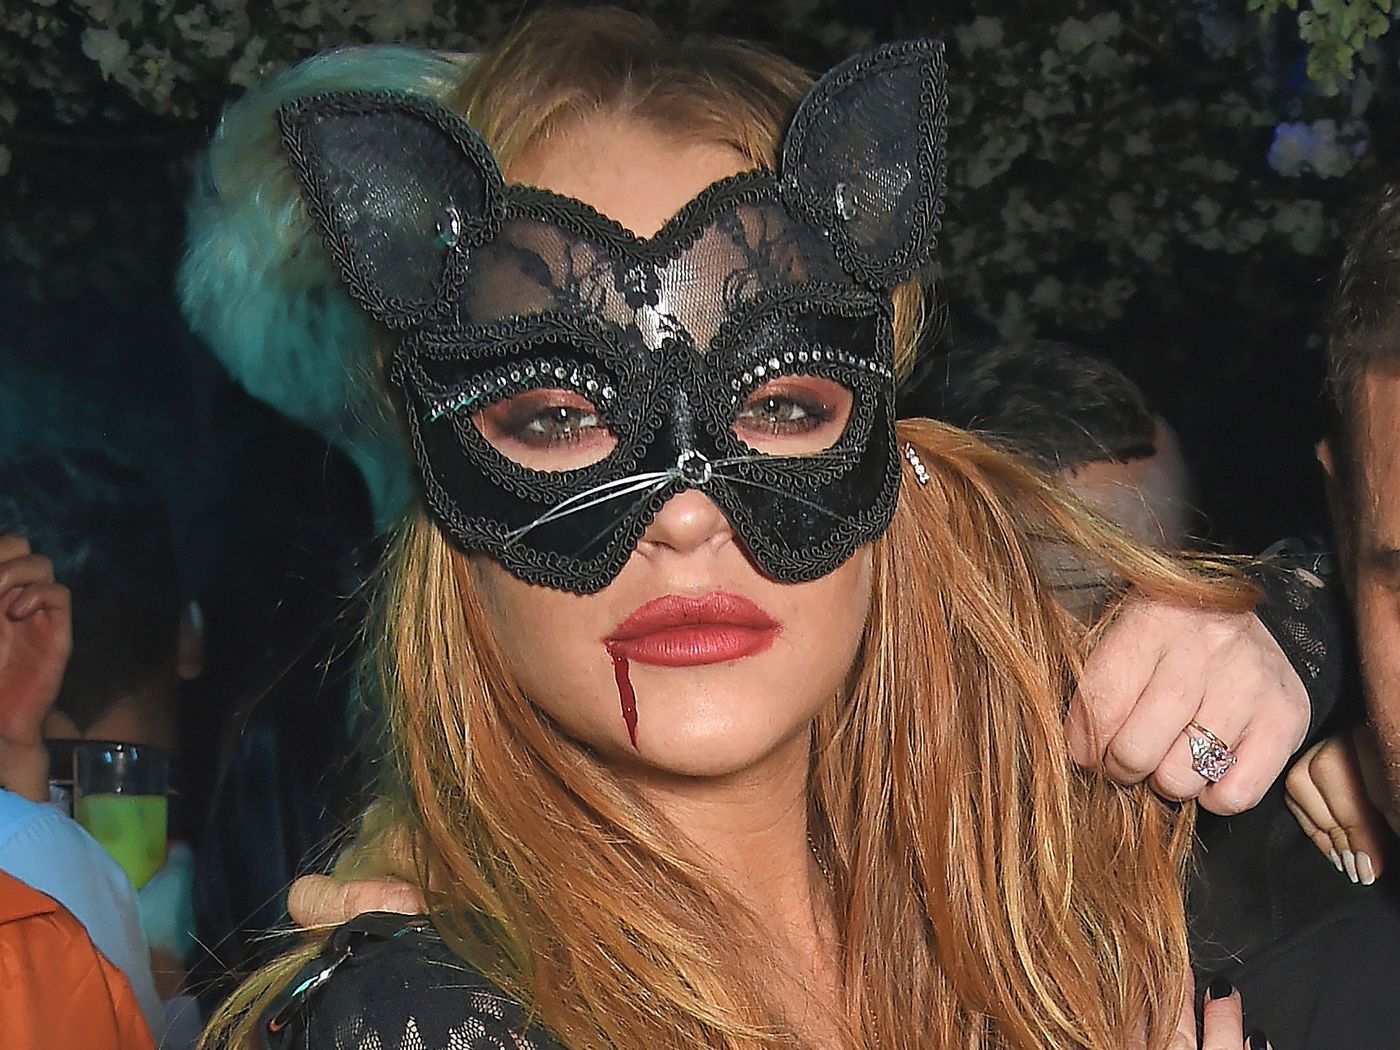 Lindsay Lohan Wore 'Lingerie and Some Form of Animal Ears' - Racked